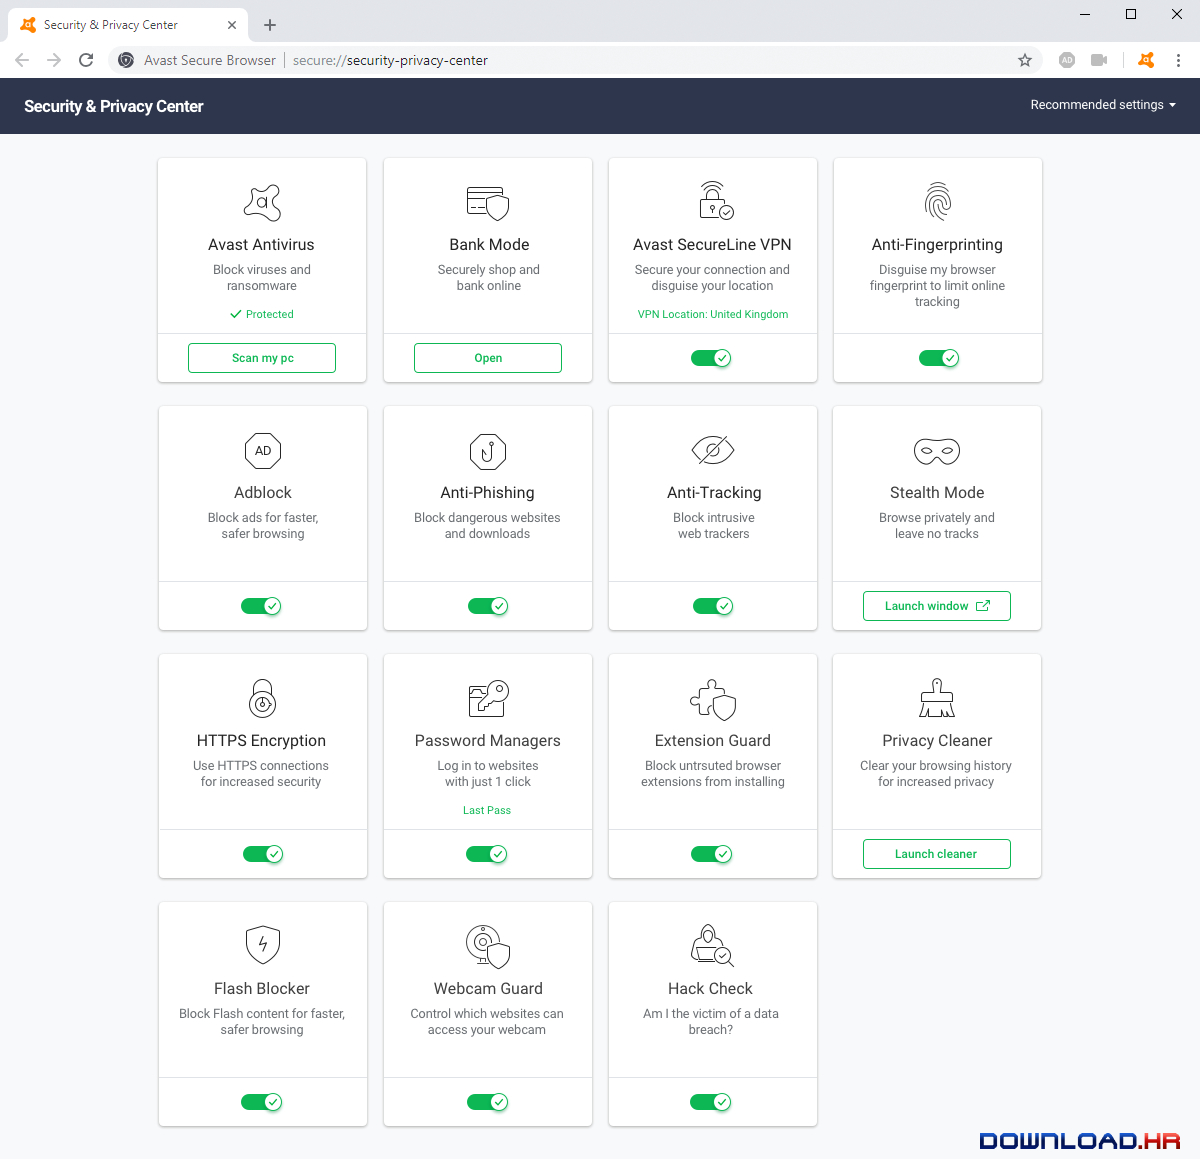 Avast Secure Browser 80.1.3901.163 80.1.3901.163 Featured Image for Version 80.1.3901.163